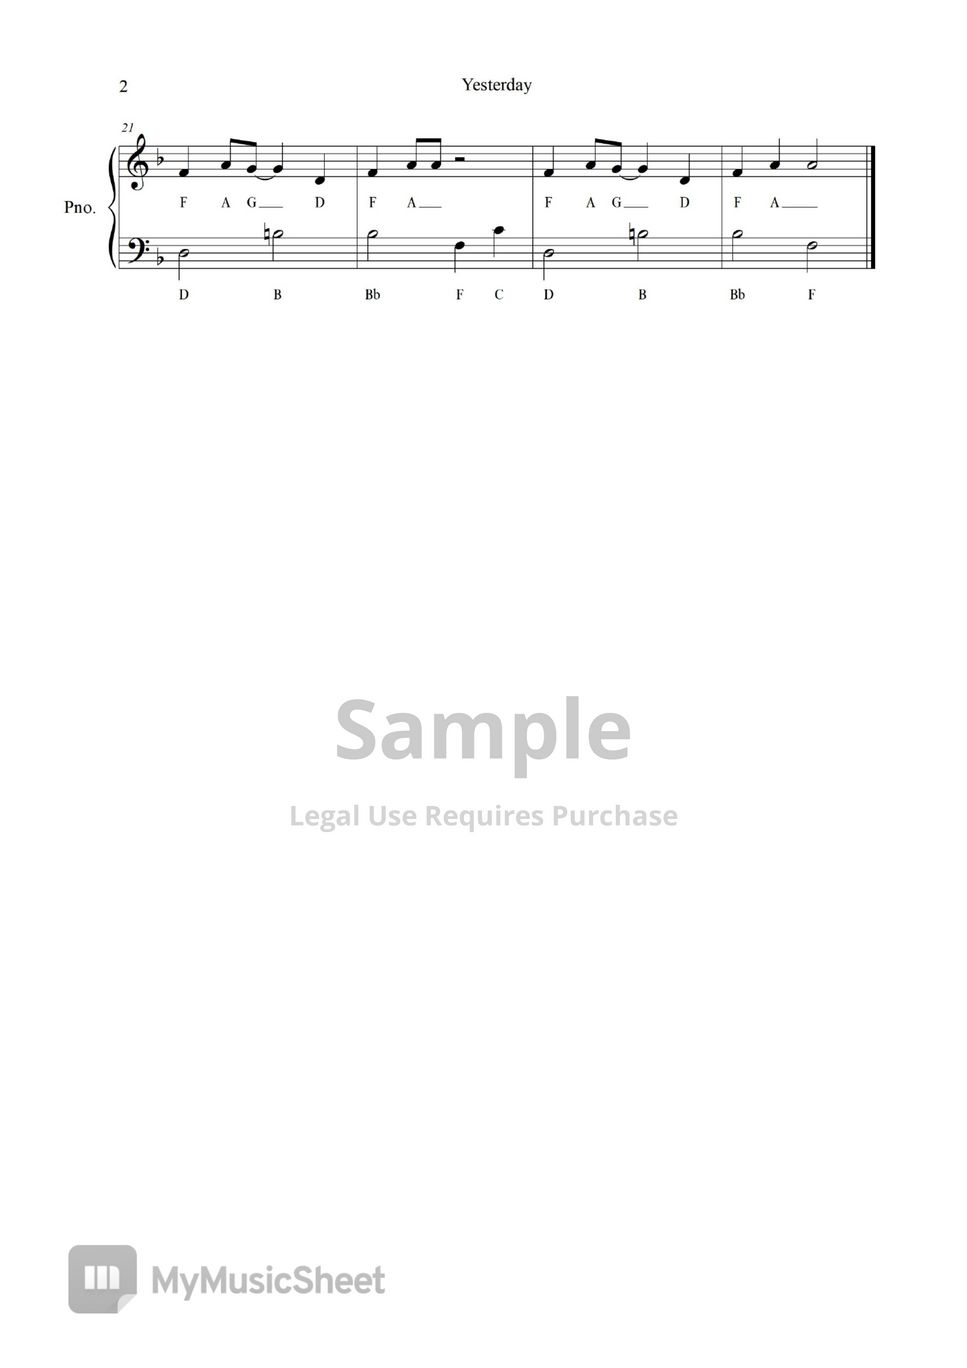 Beatles - Yesterday (Notes Sheet Musi) by freestyle pianoman